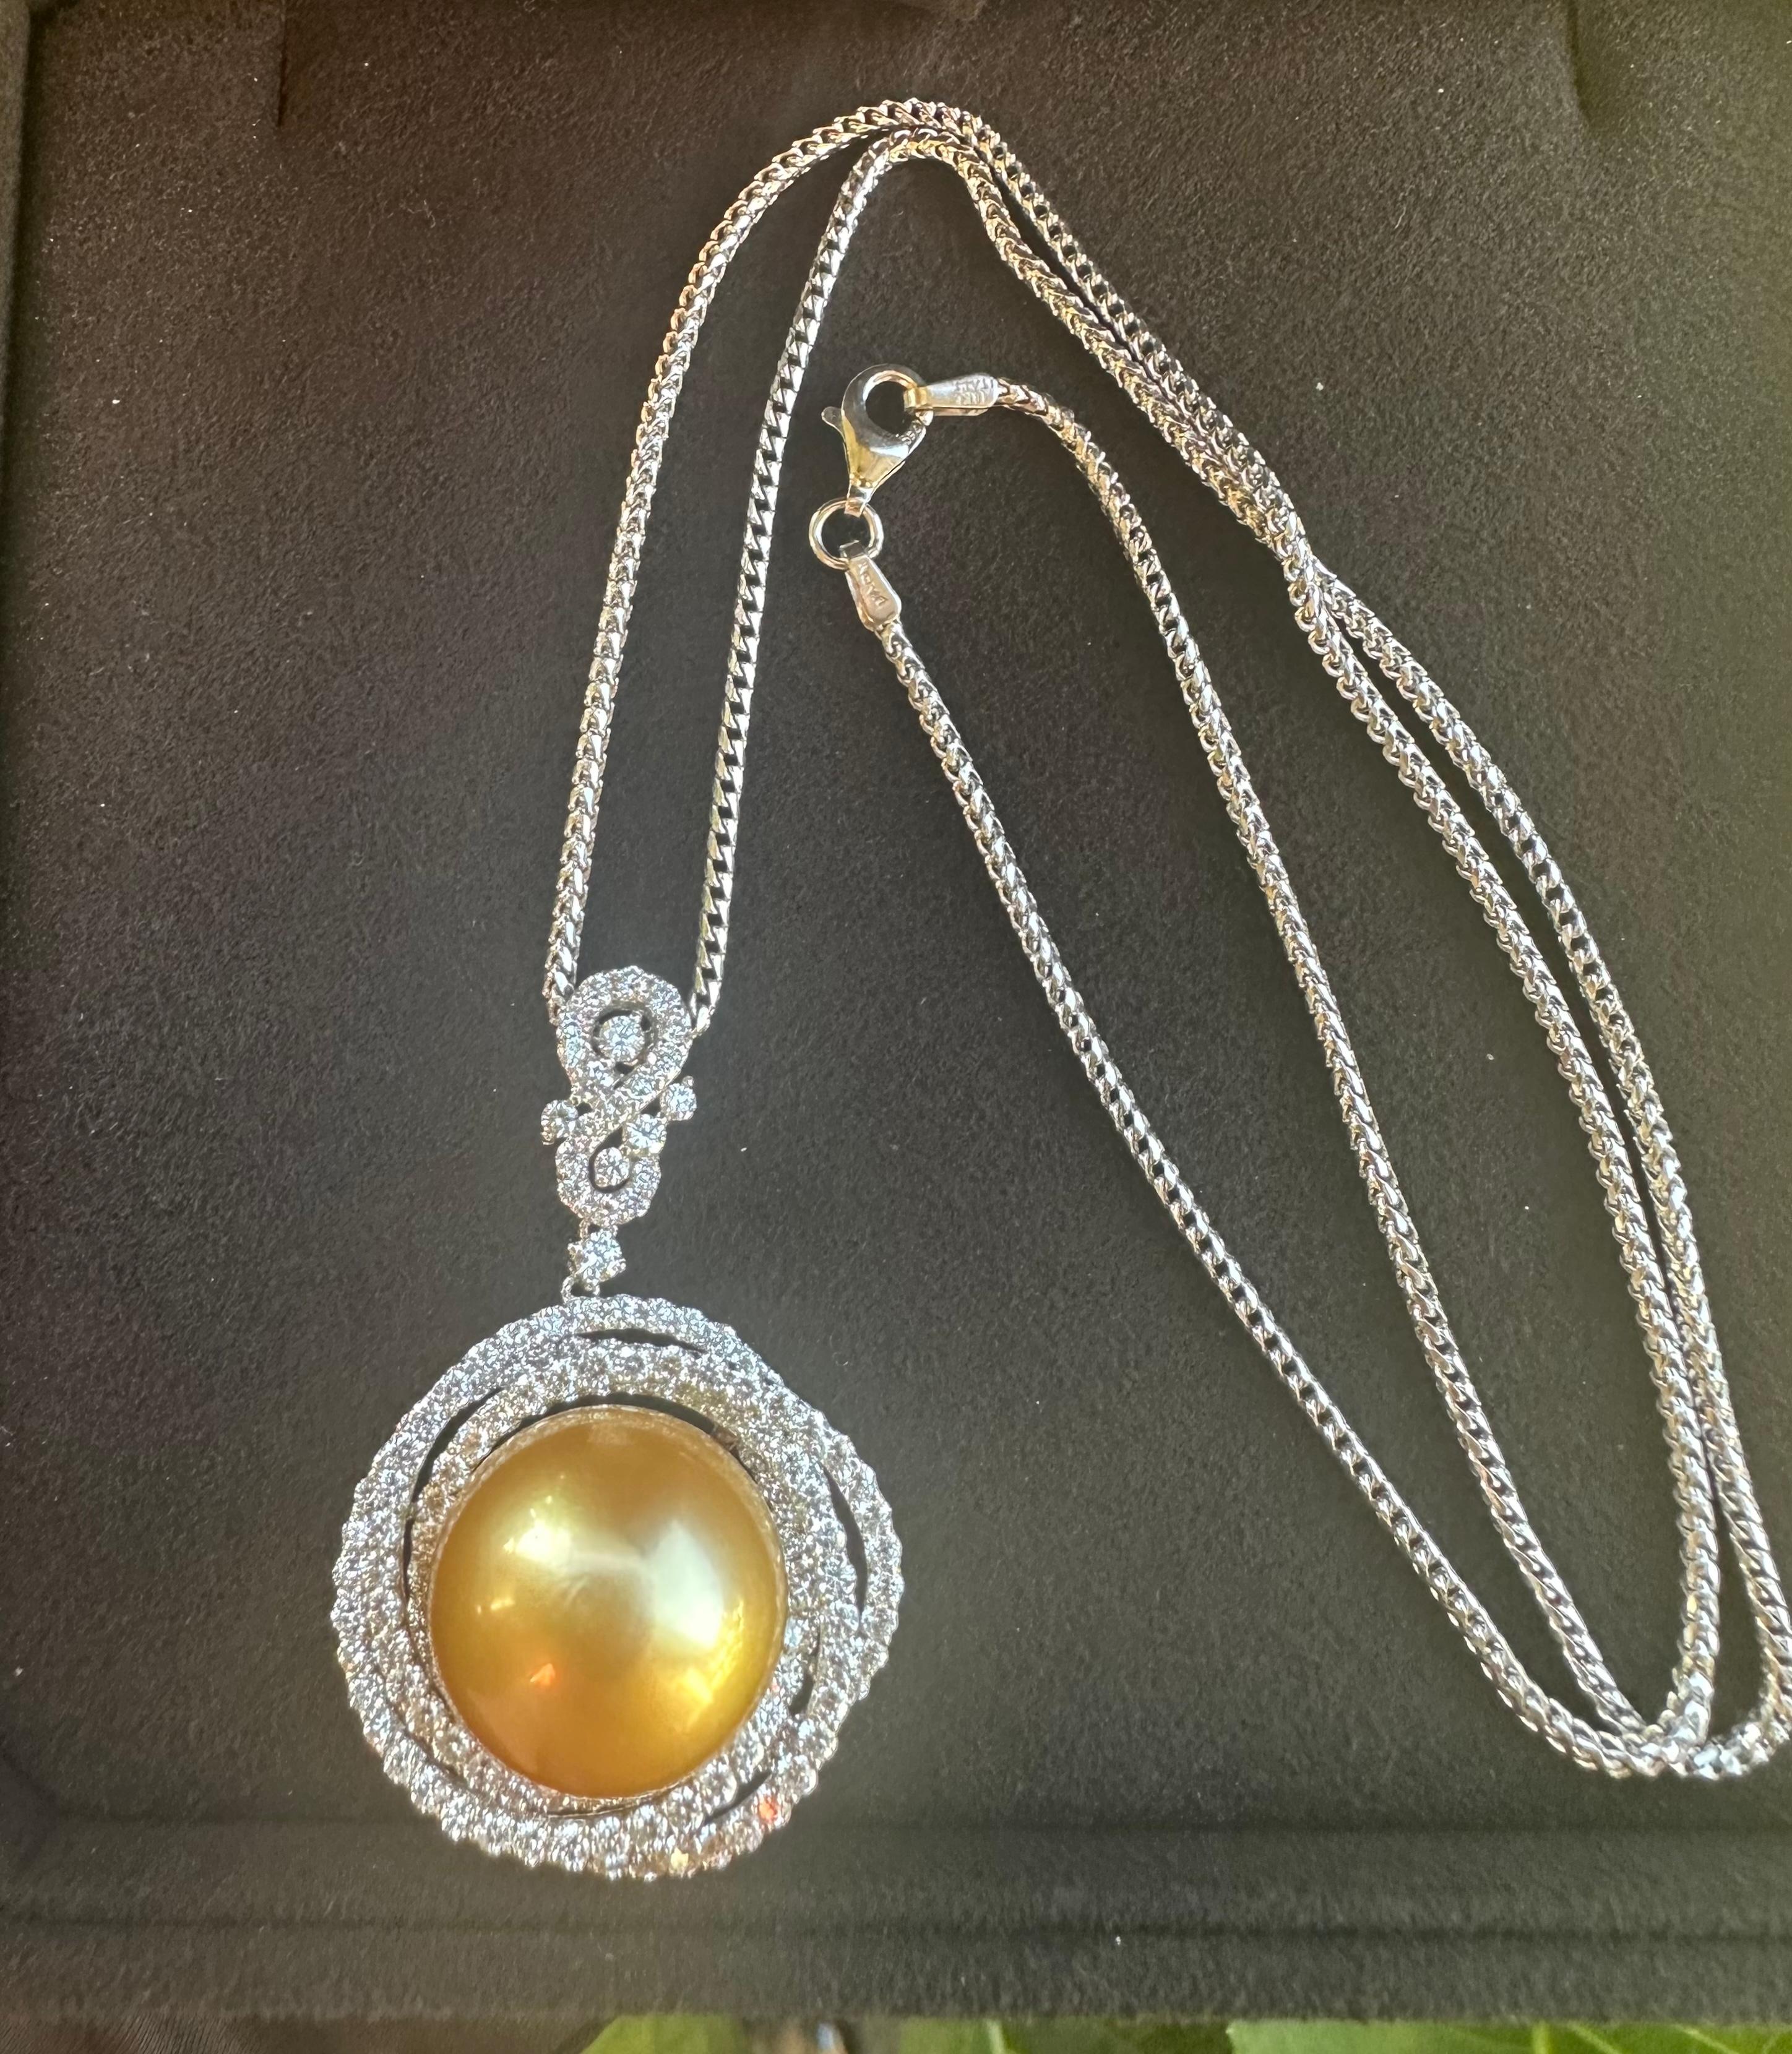 Huge 16.75 MM Golden South Sea Pearl 6.19 Carat Diamond 18k White Gold Necklace 1